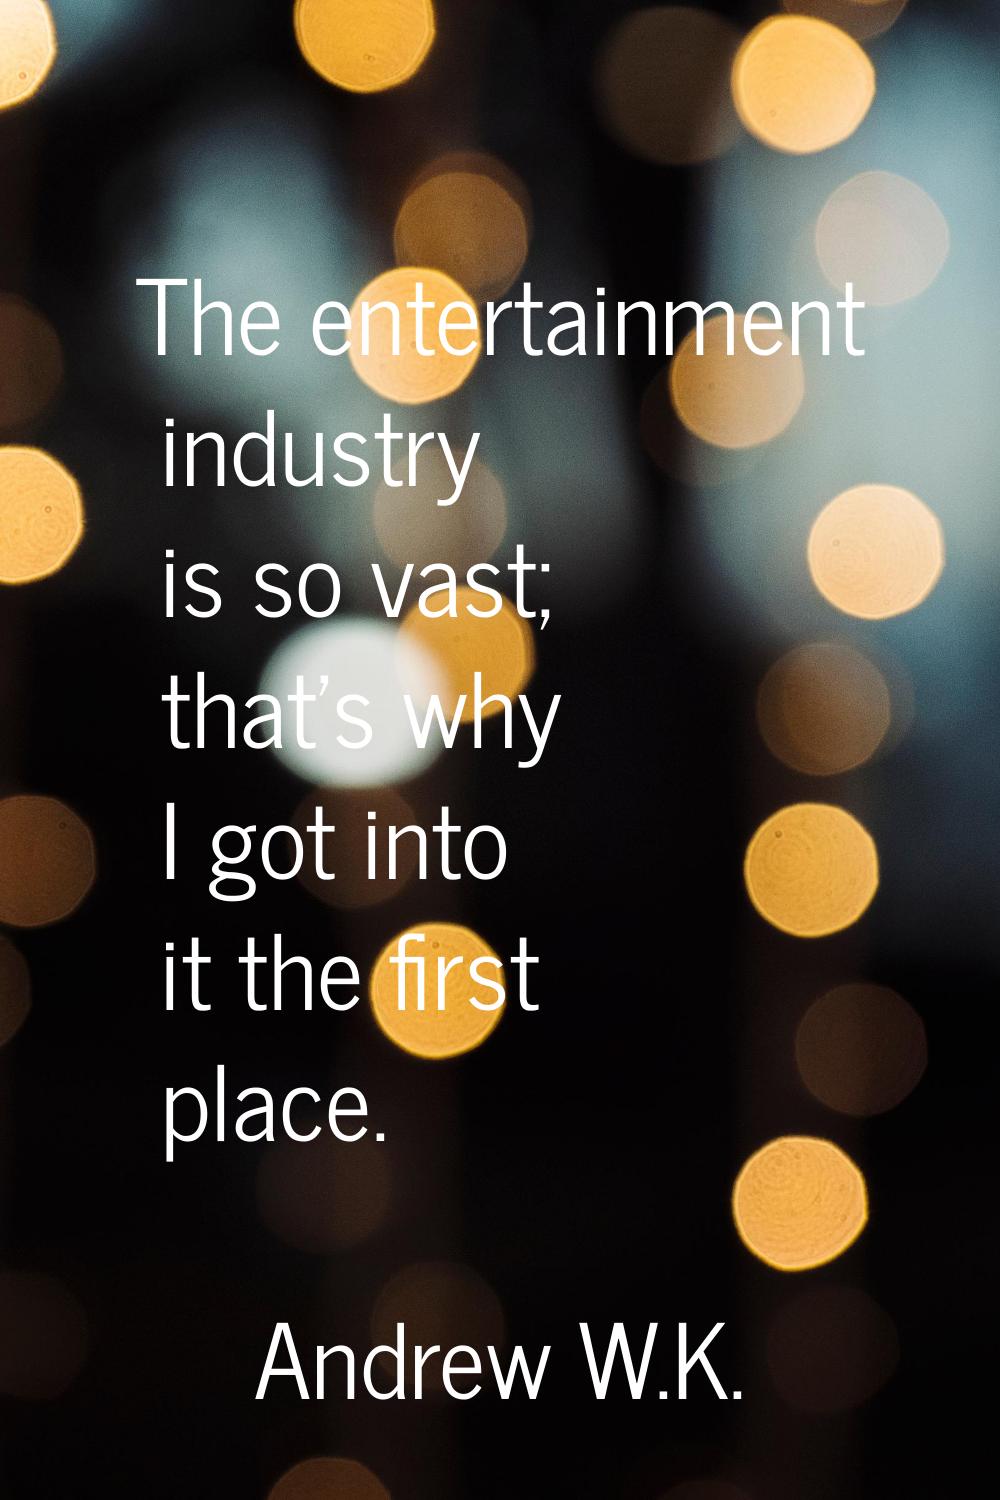 The entertainment industry is so vast; that's why I got into it the first place.